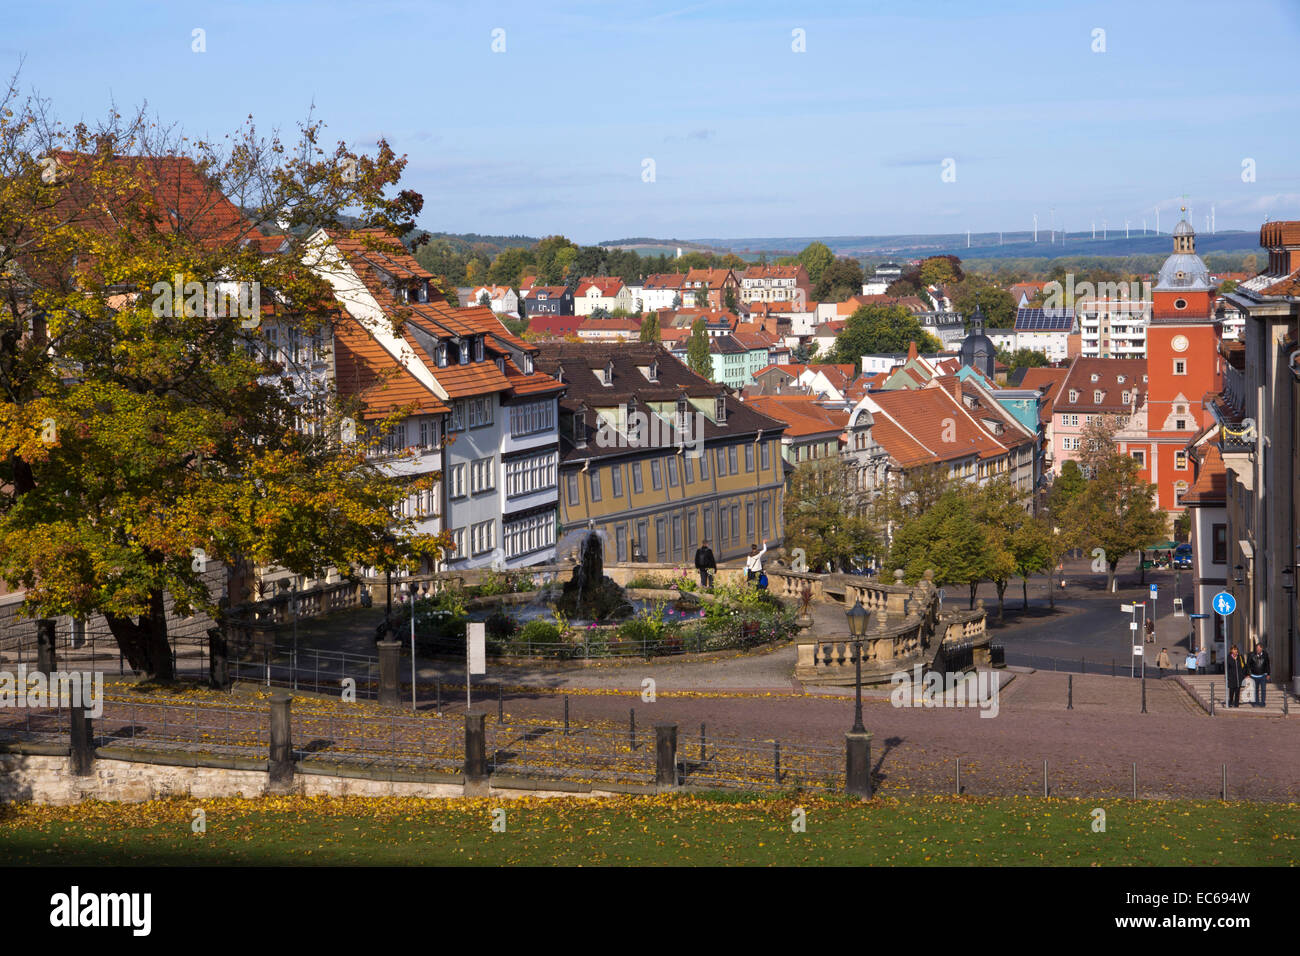 View of Gotha with the Hauptmarkt square and the historic town hall tower, Gotha, Thuringia, Germany, Europe Stock Photo